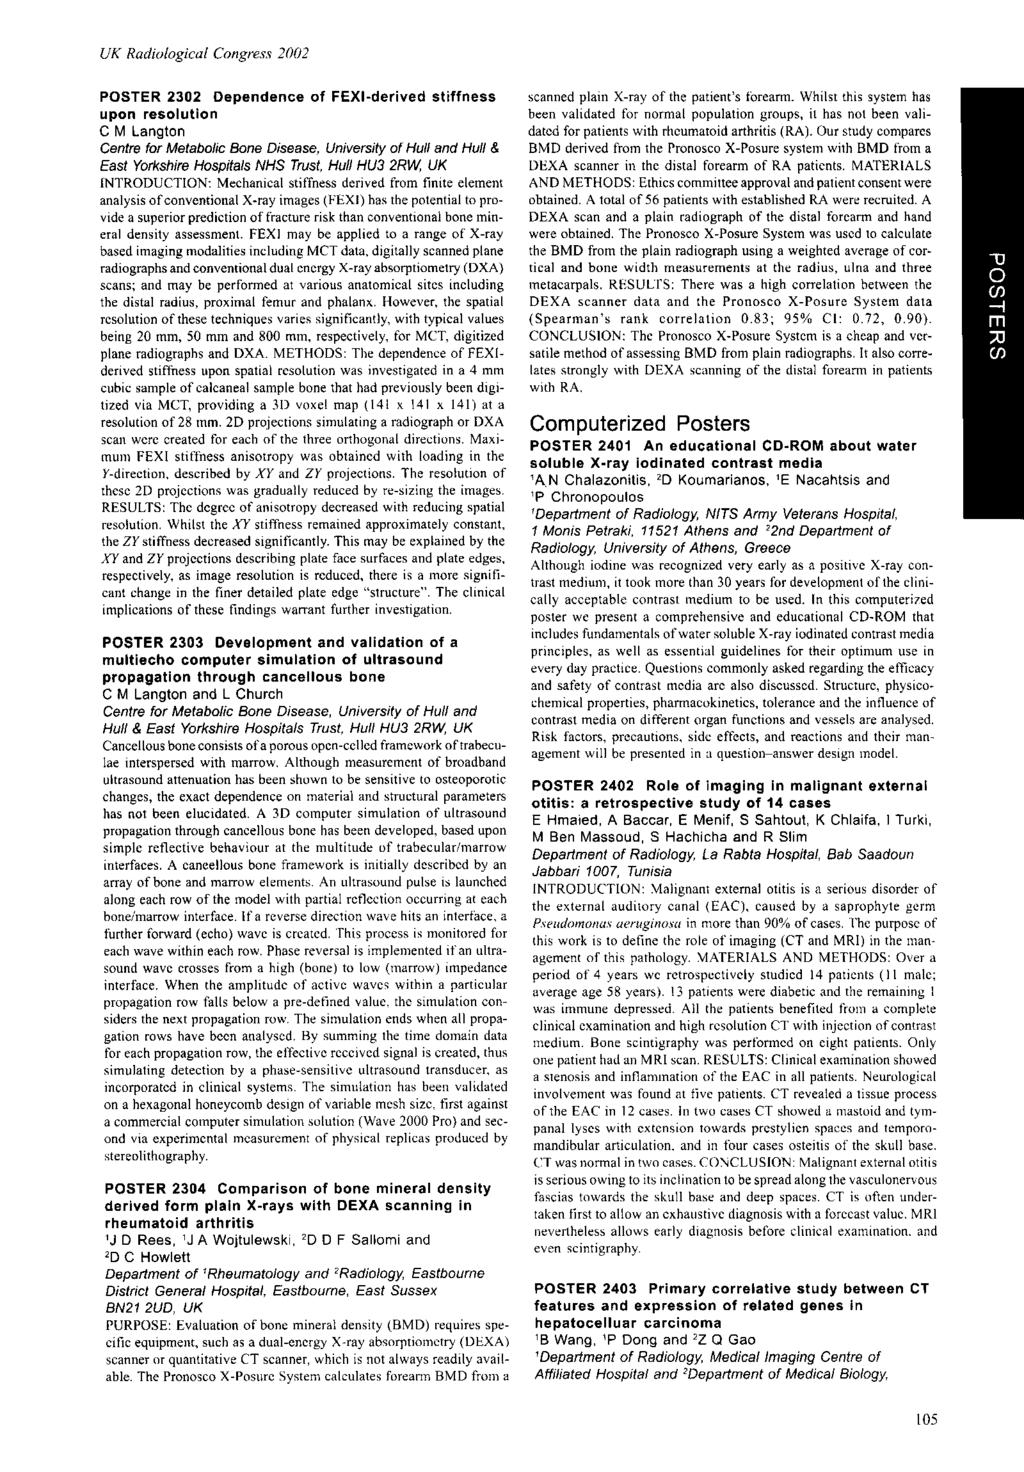 POSTER 2302 Dependence of FEXI-derived stiffness upon resolution C M Langton Centre for Metabolic Bone Disease, University of Hull and Hull & East Yorkshire Hospitals NHS Trust, Hull HU3 2RW, UK